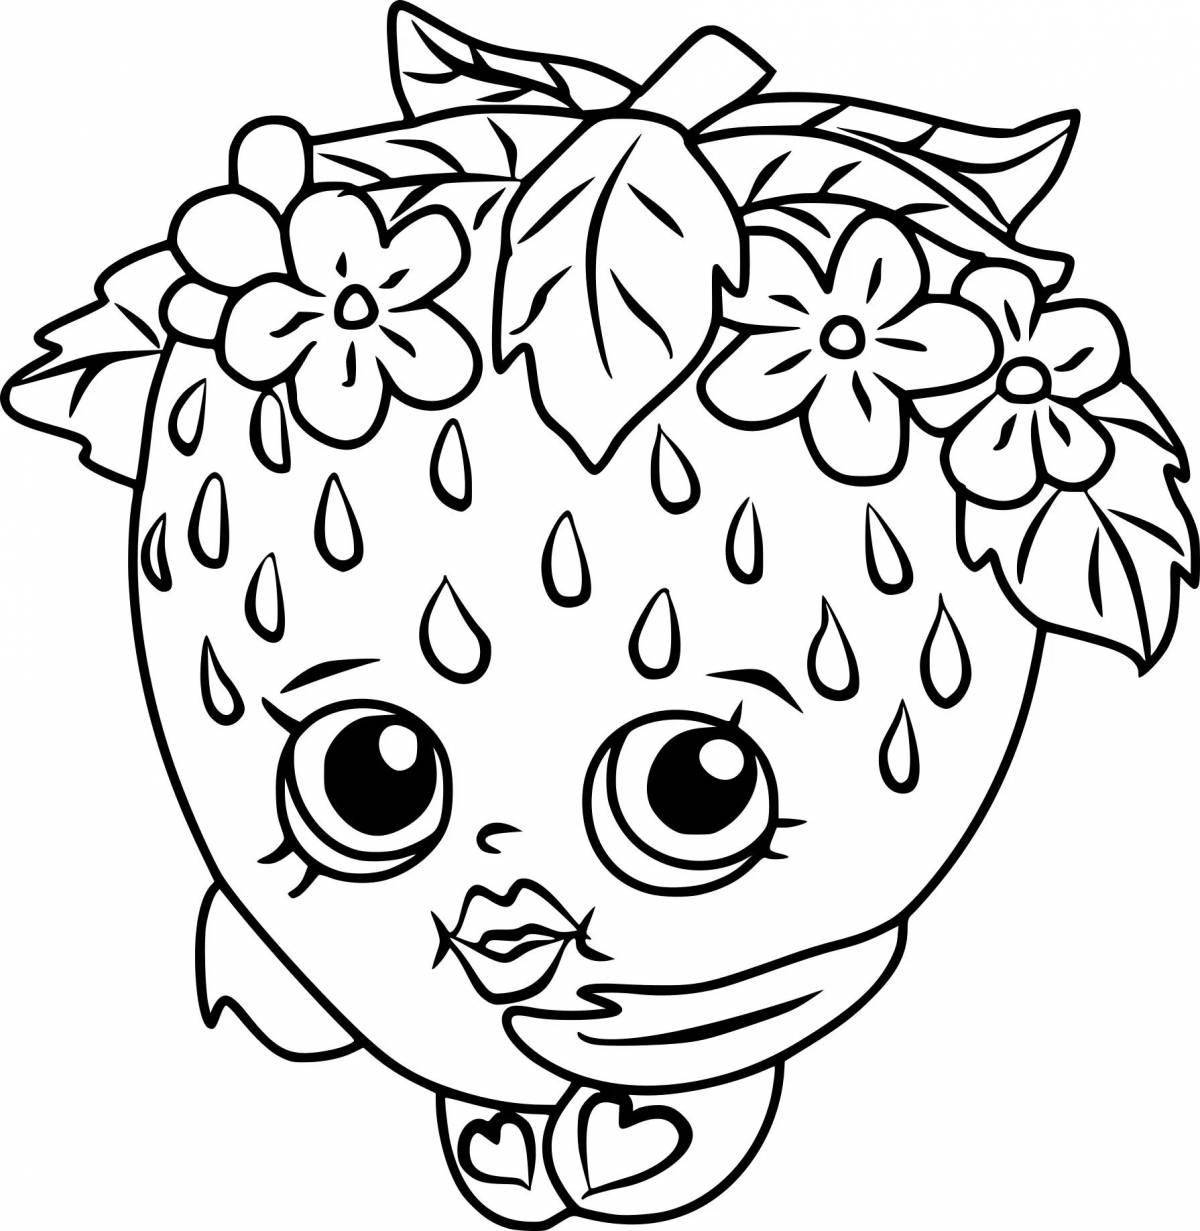 Coloring pages with playful fruits for girls